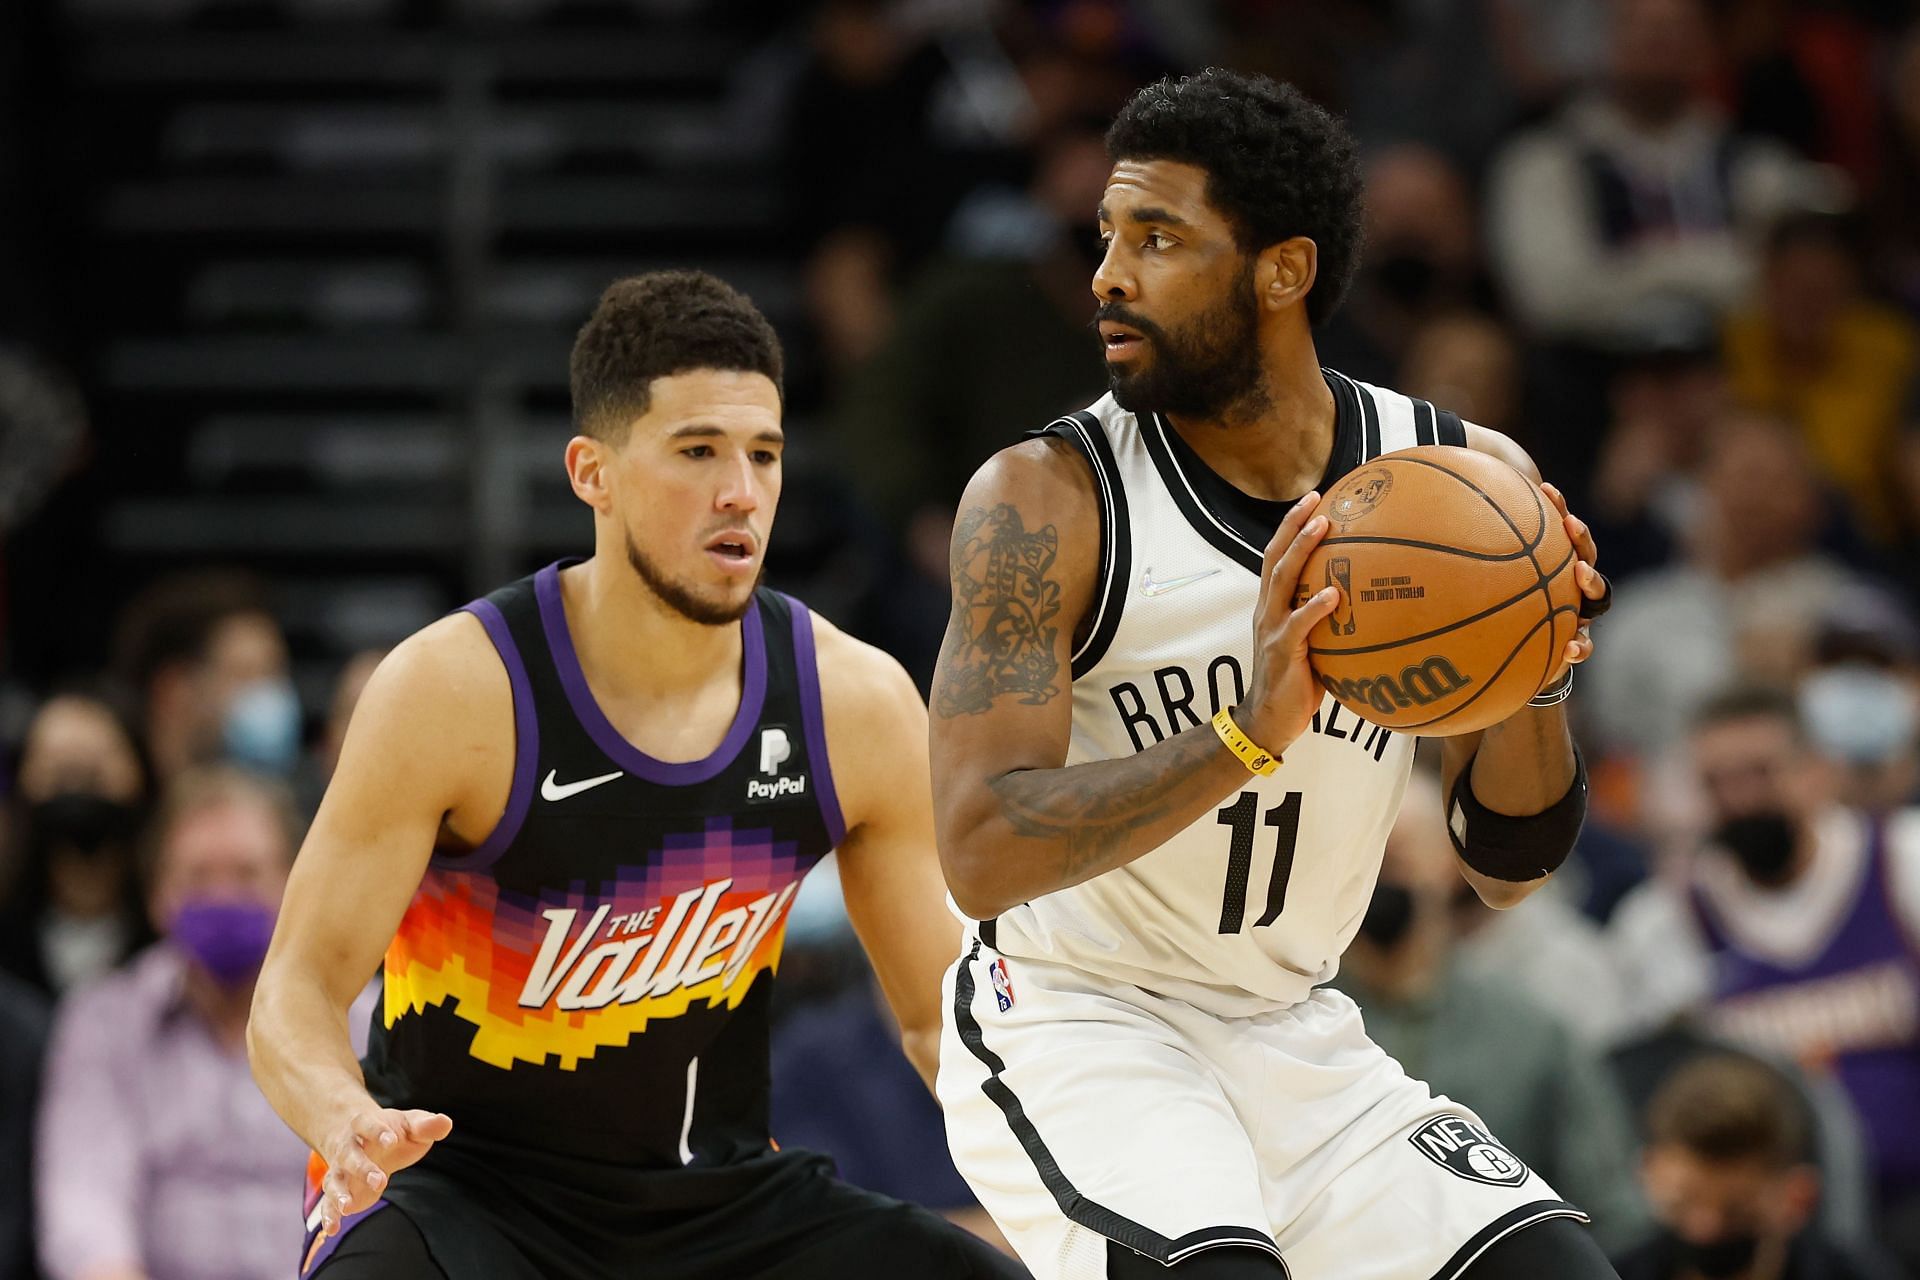 Kyrie Irving of the Brooklyn Nets handles the ball against Devin Booker of the Phoenix Suns on Wednesday in Phoenix, Arizona.